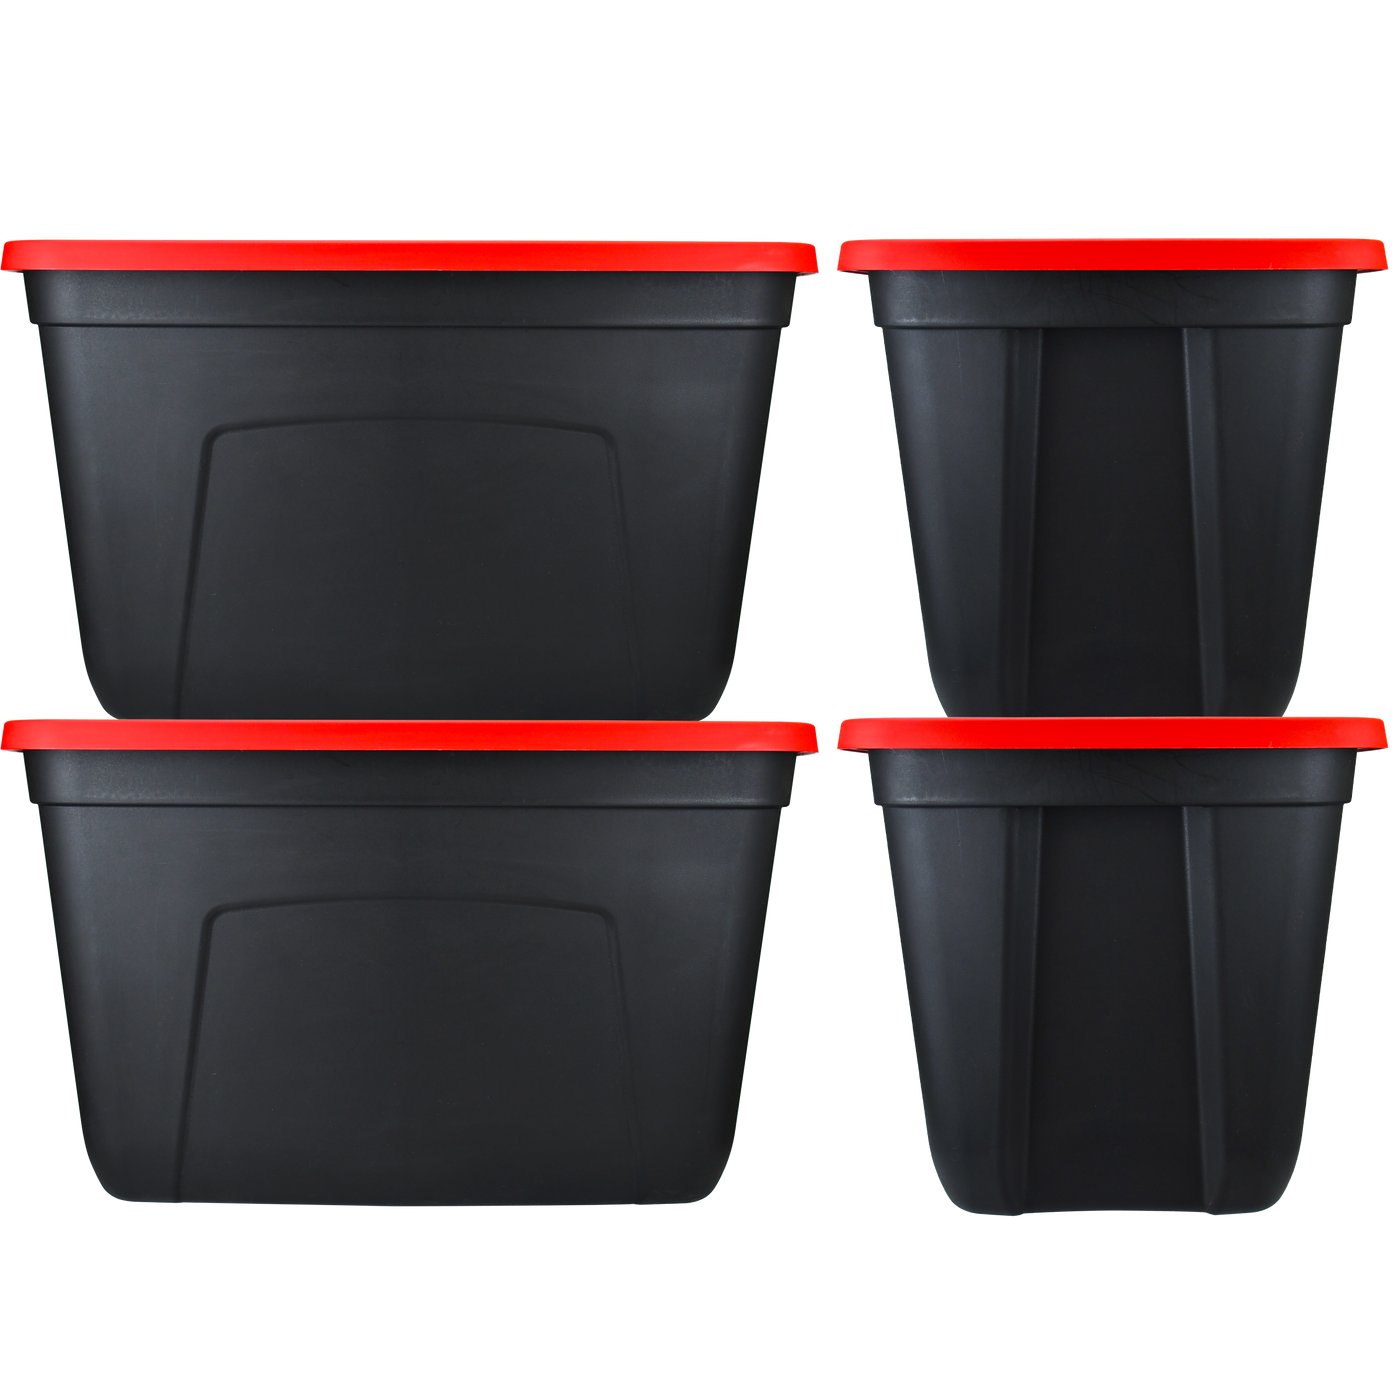  SIMPLYKLEEN 4-Pack Christmas Storage Totes with Lids